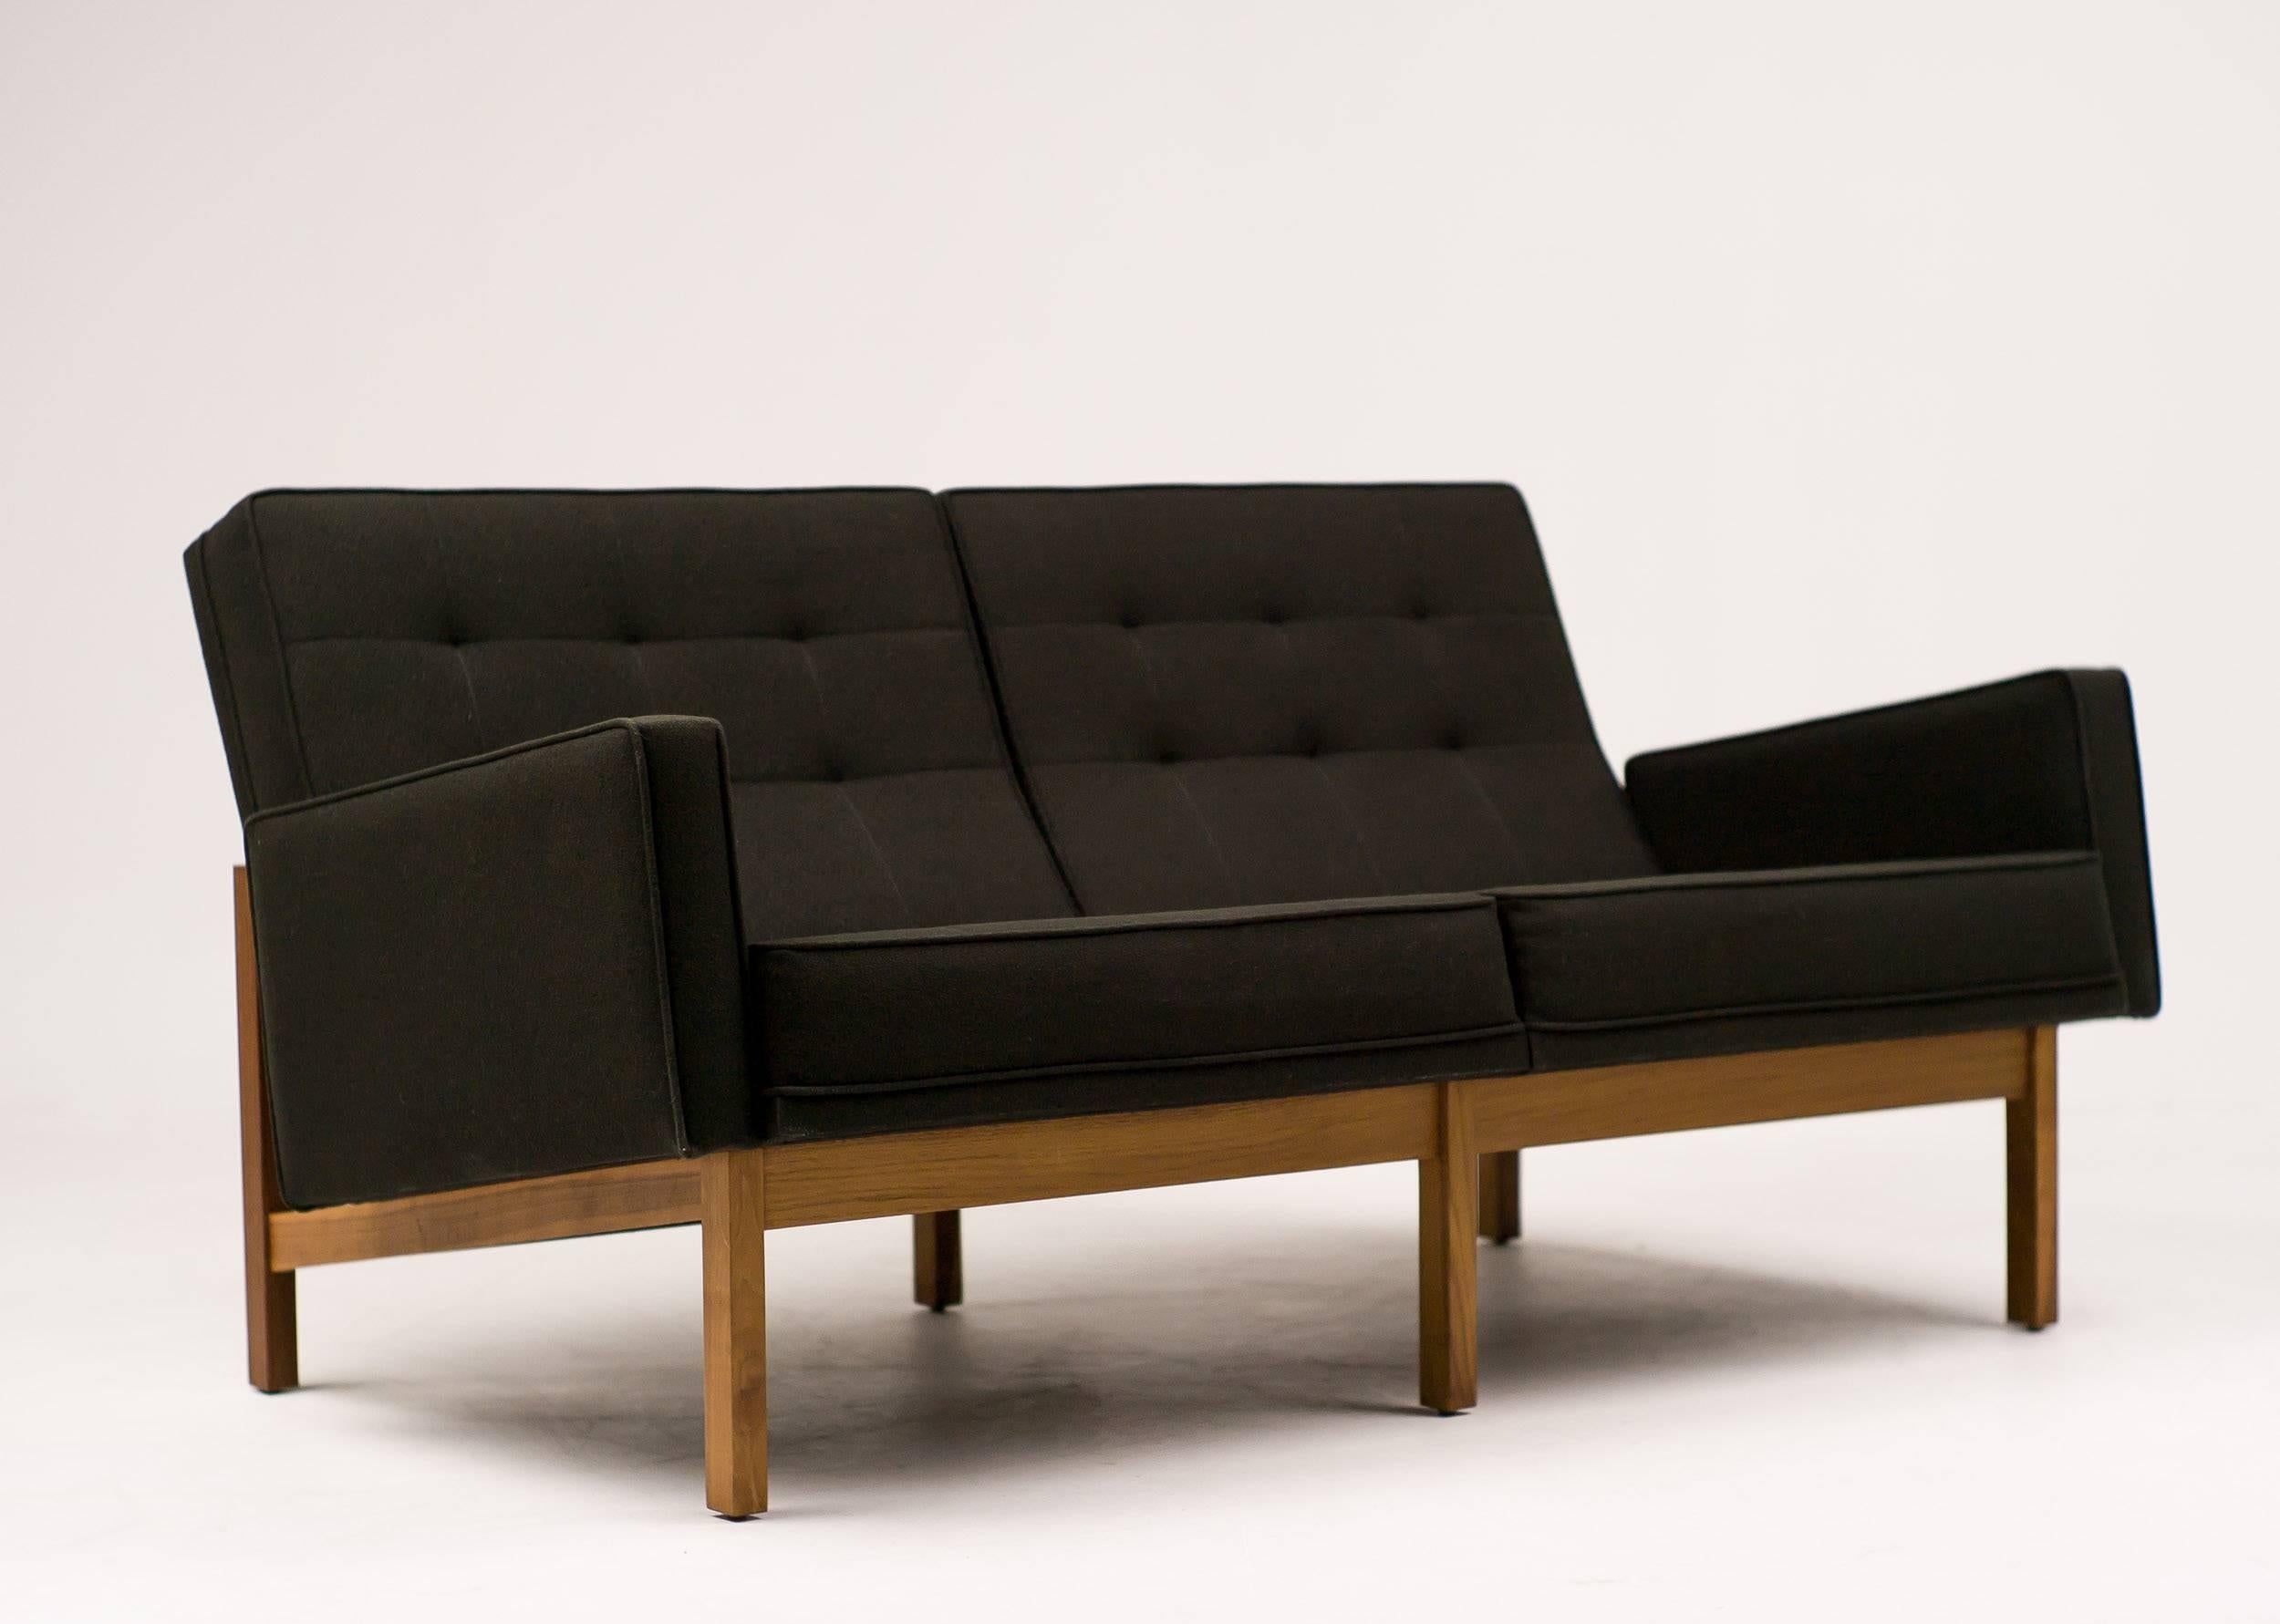 Split rail two-seat sofa in walnut with charcoal fabric designed by Florence Knoll, manufactured by Modernica.

Excellent fast and affordable worldwide shipping.
White glove delivery available upon request.